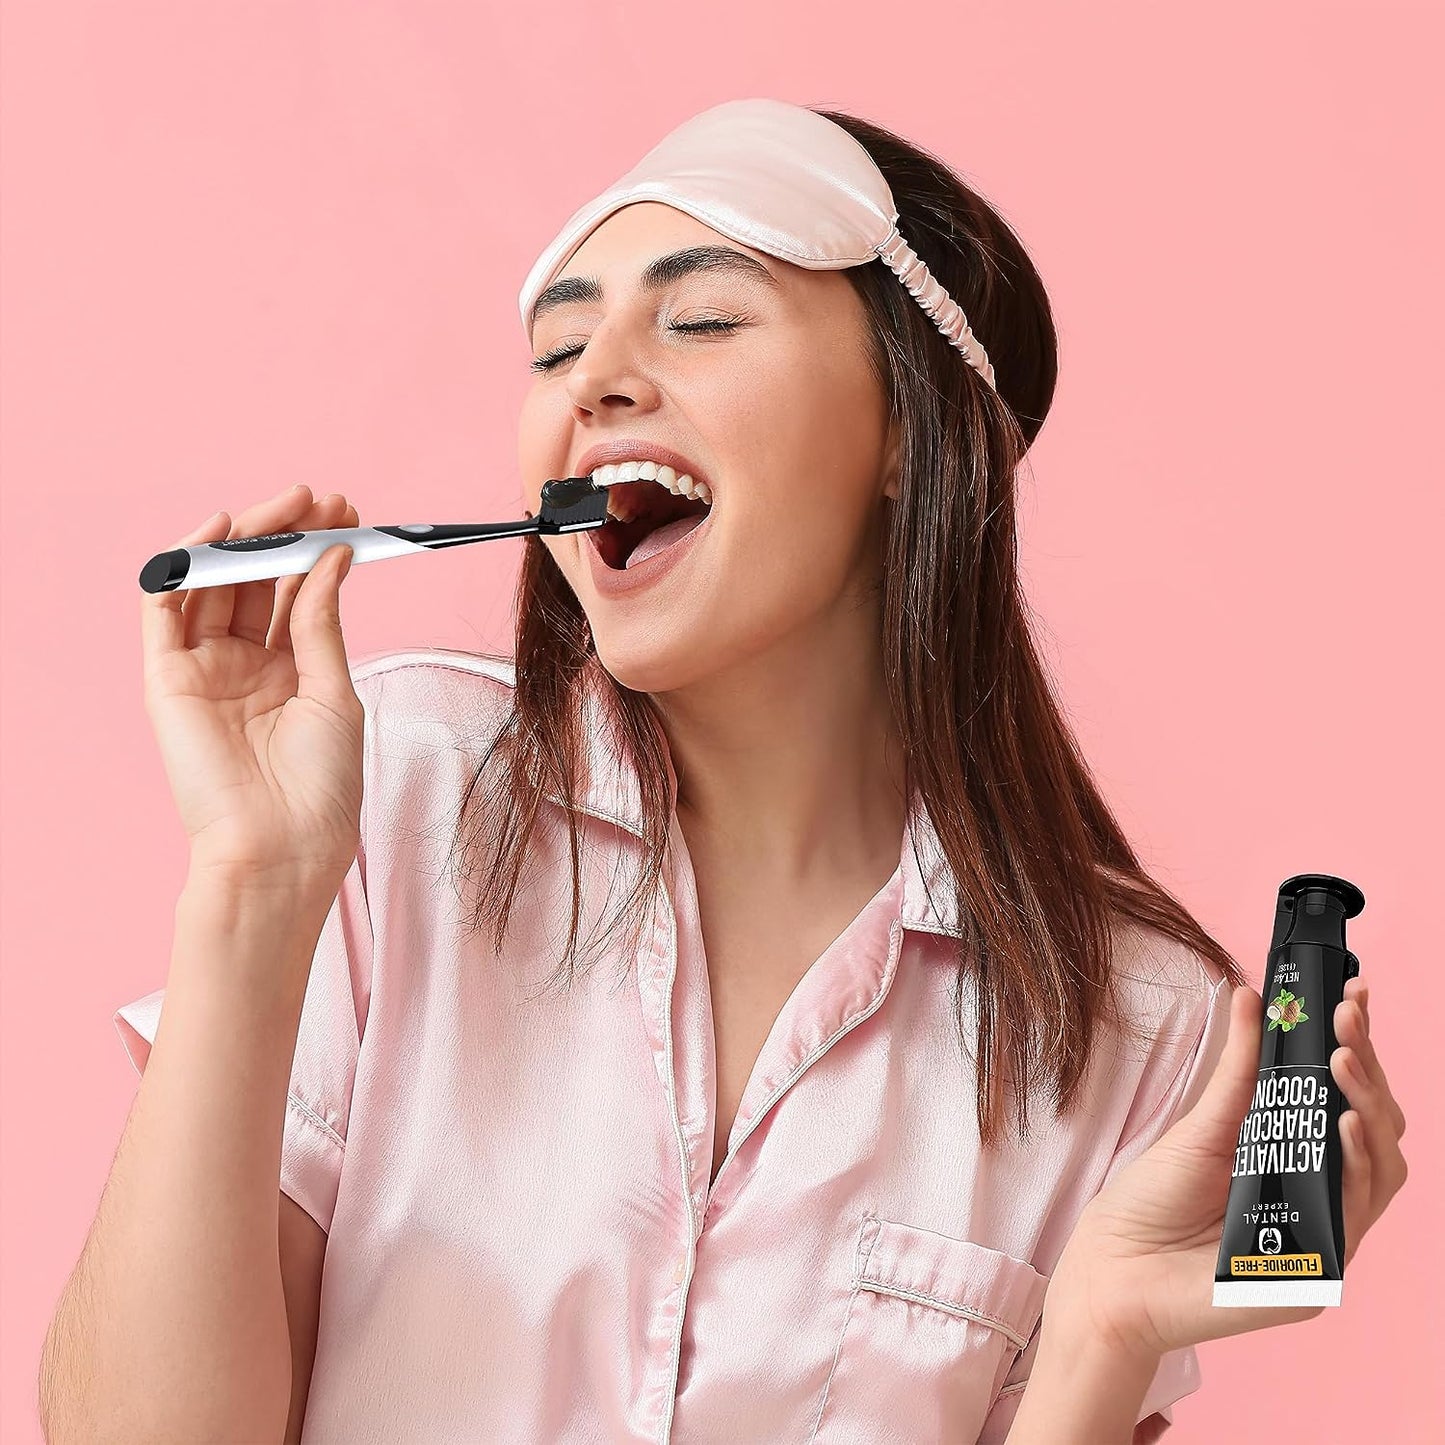 Dental Expert Charcoal Toothpaste Whitening, SLS Free, Tongue Cleaner & Toothbrush Included, Mint, Removes Coffee Stains from Teeth, 4oz - Premium toothpaste from Concordia Style Boutique - Just $15.45! Shop now at Concordia Style Boutique